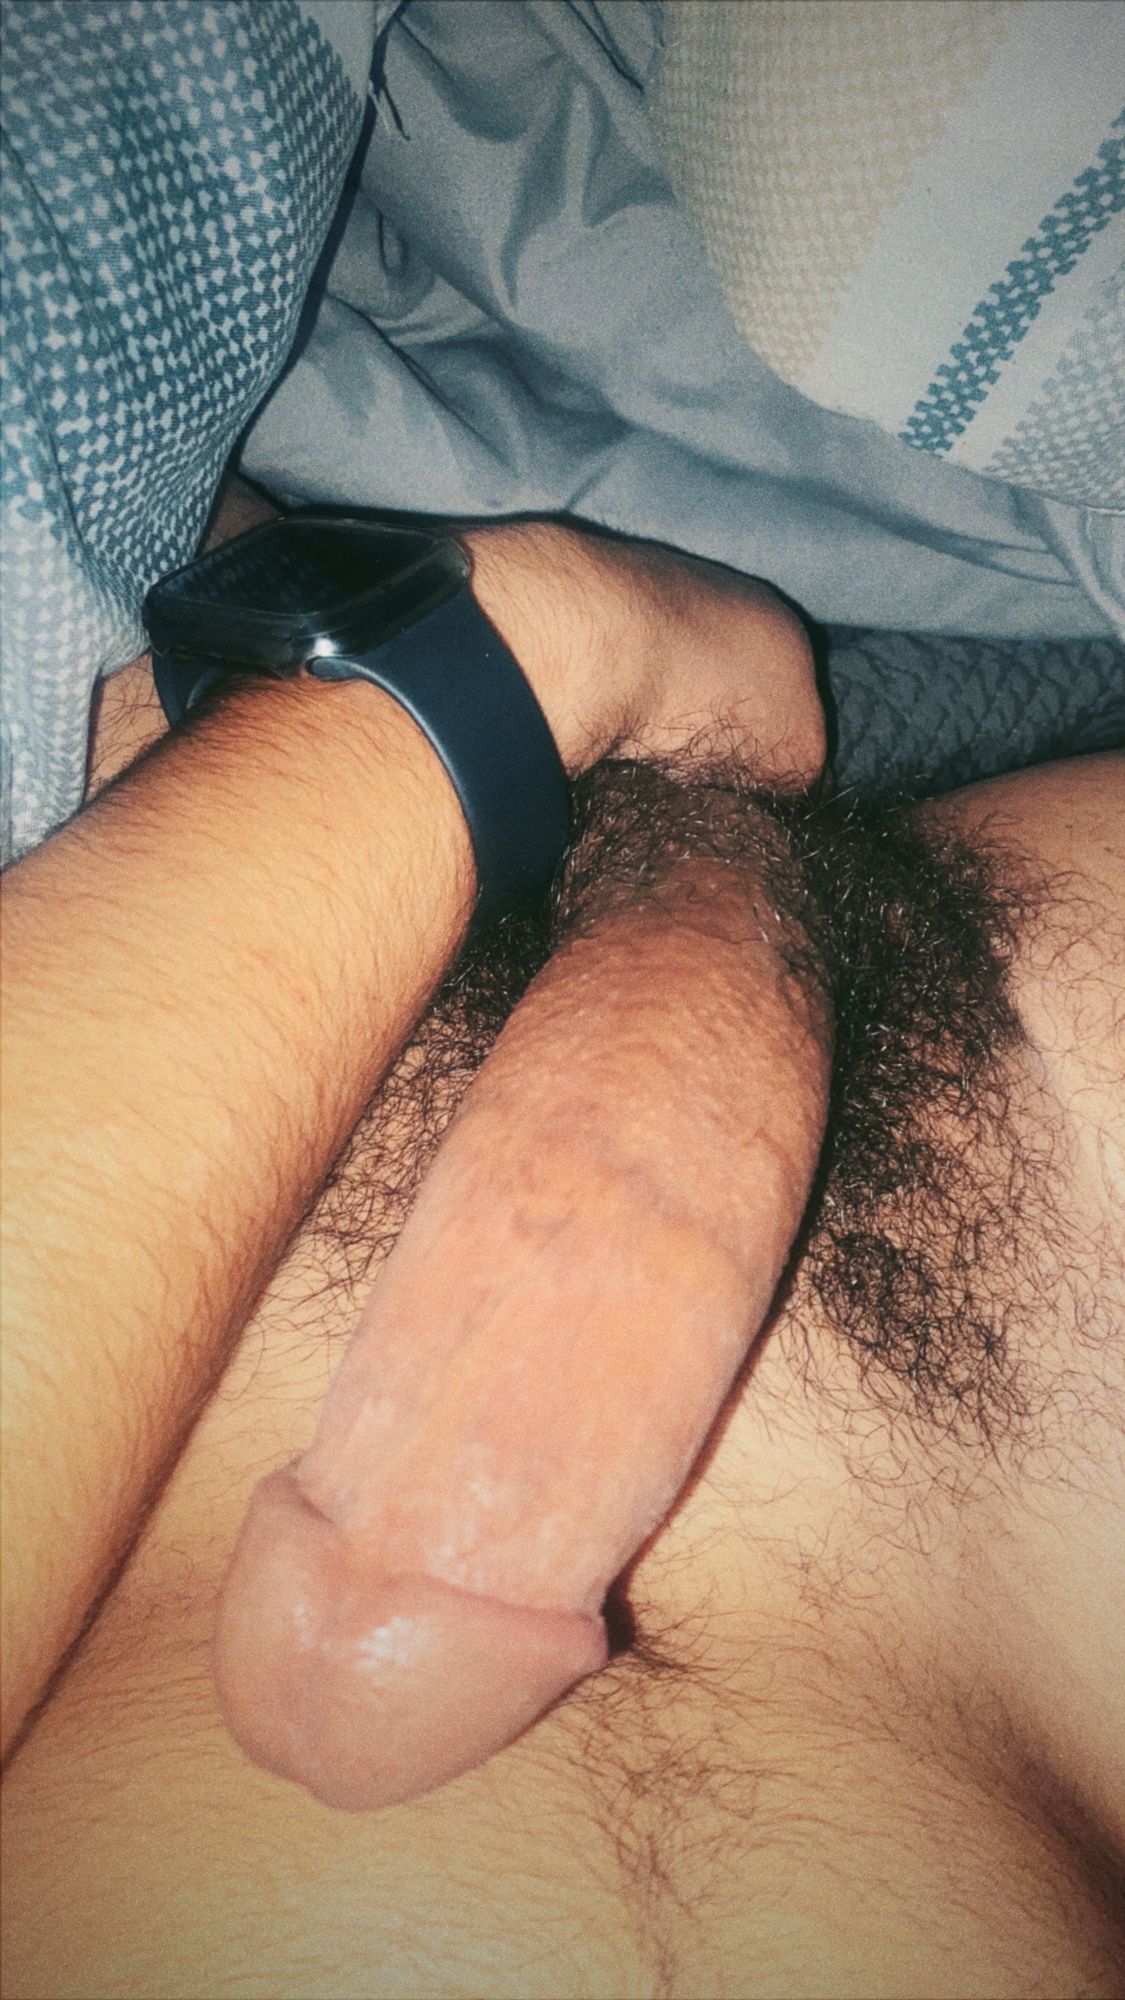 More quick snaps of my hard cock